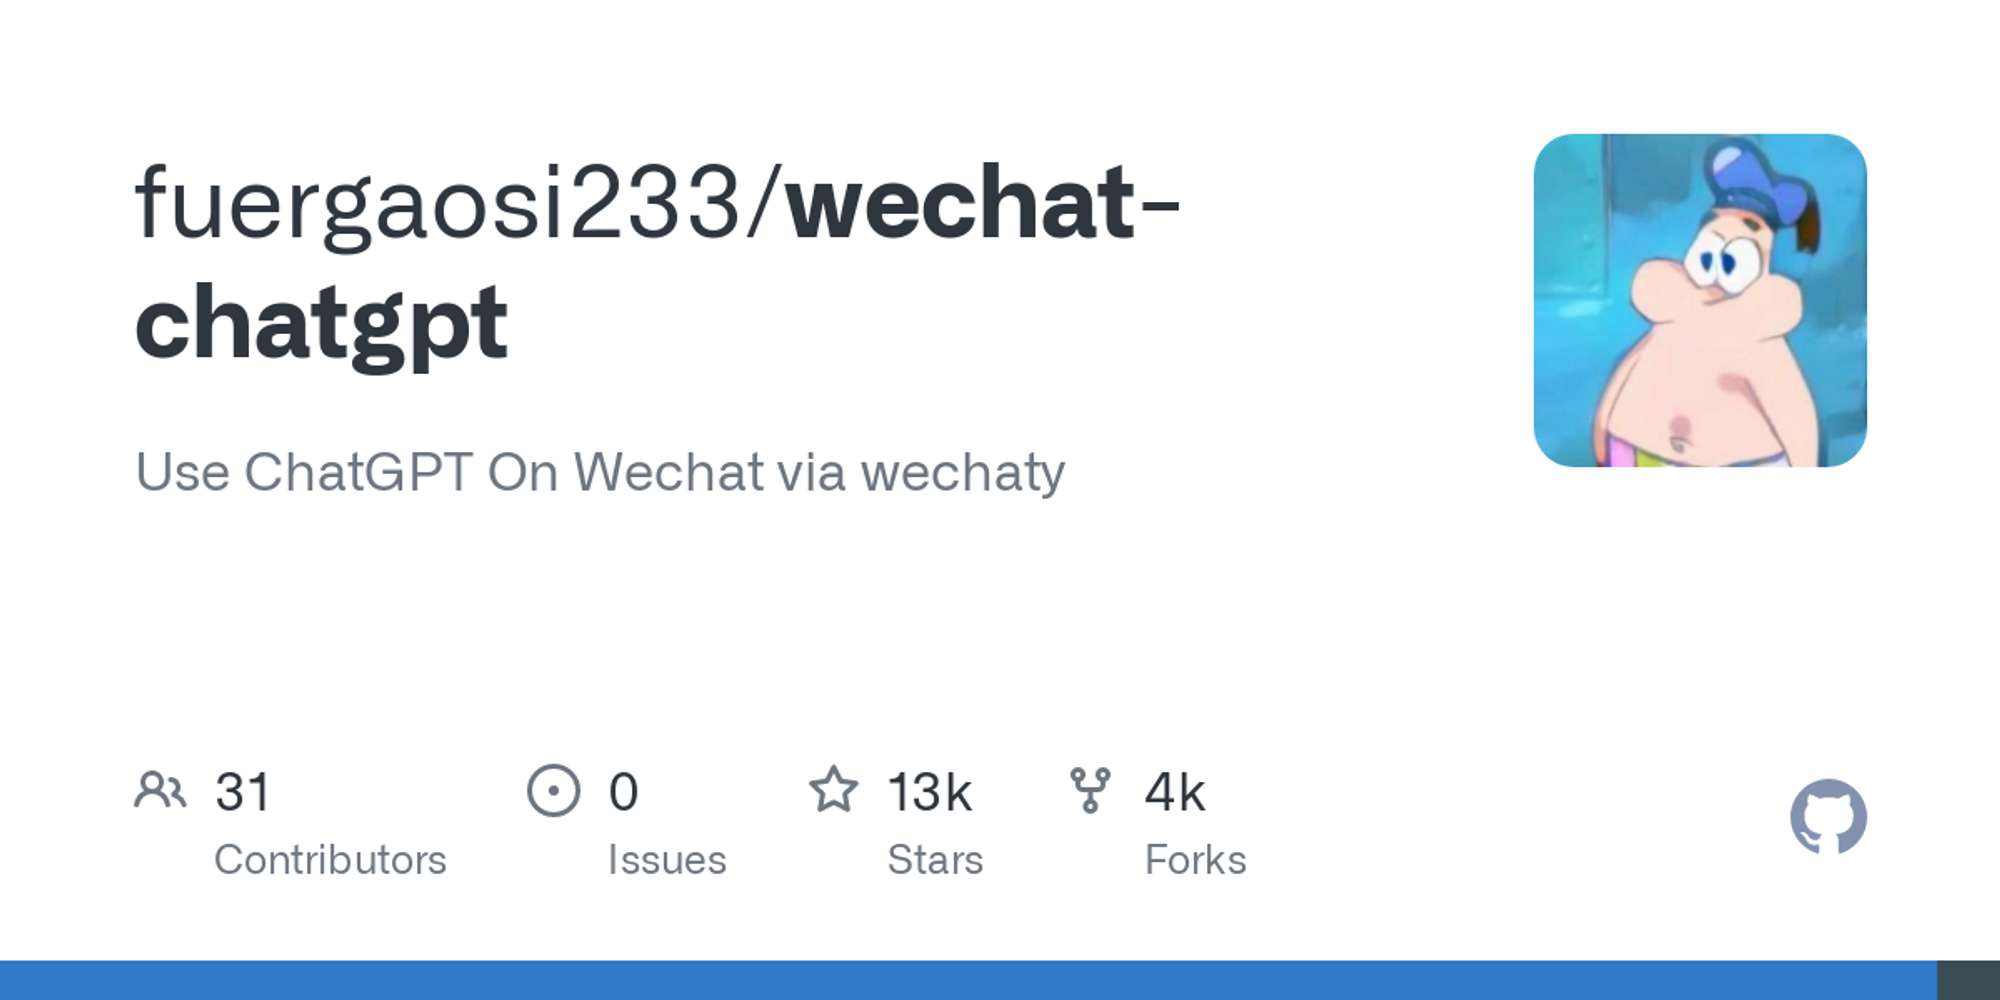 wechat-chatgpt/README_ZH.md at main · fuergaosi233/wechat-chatgpt